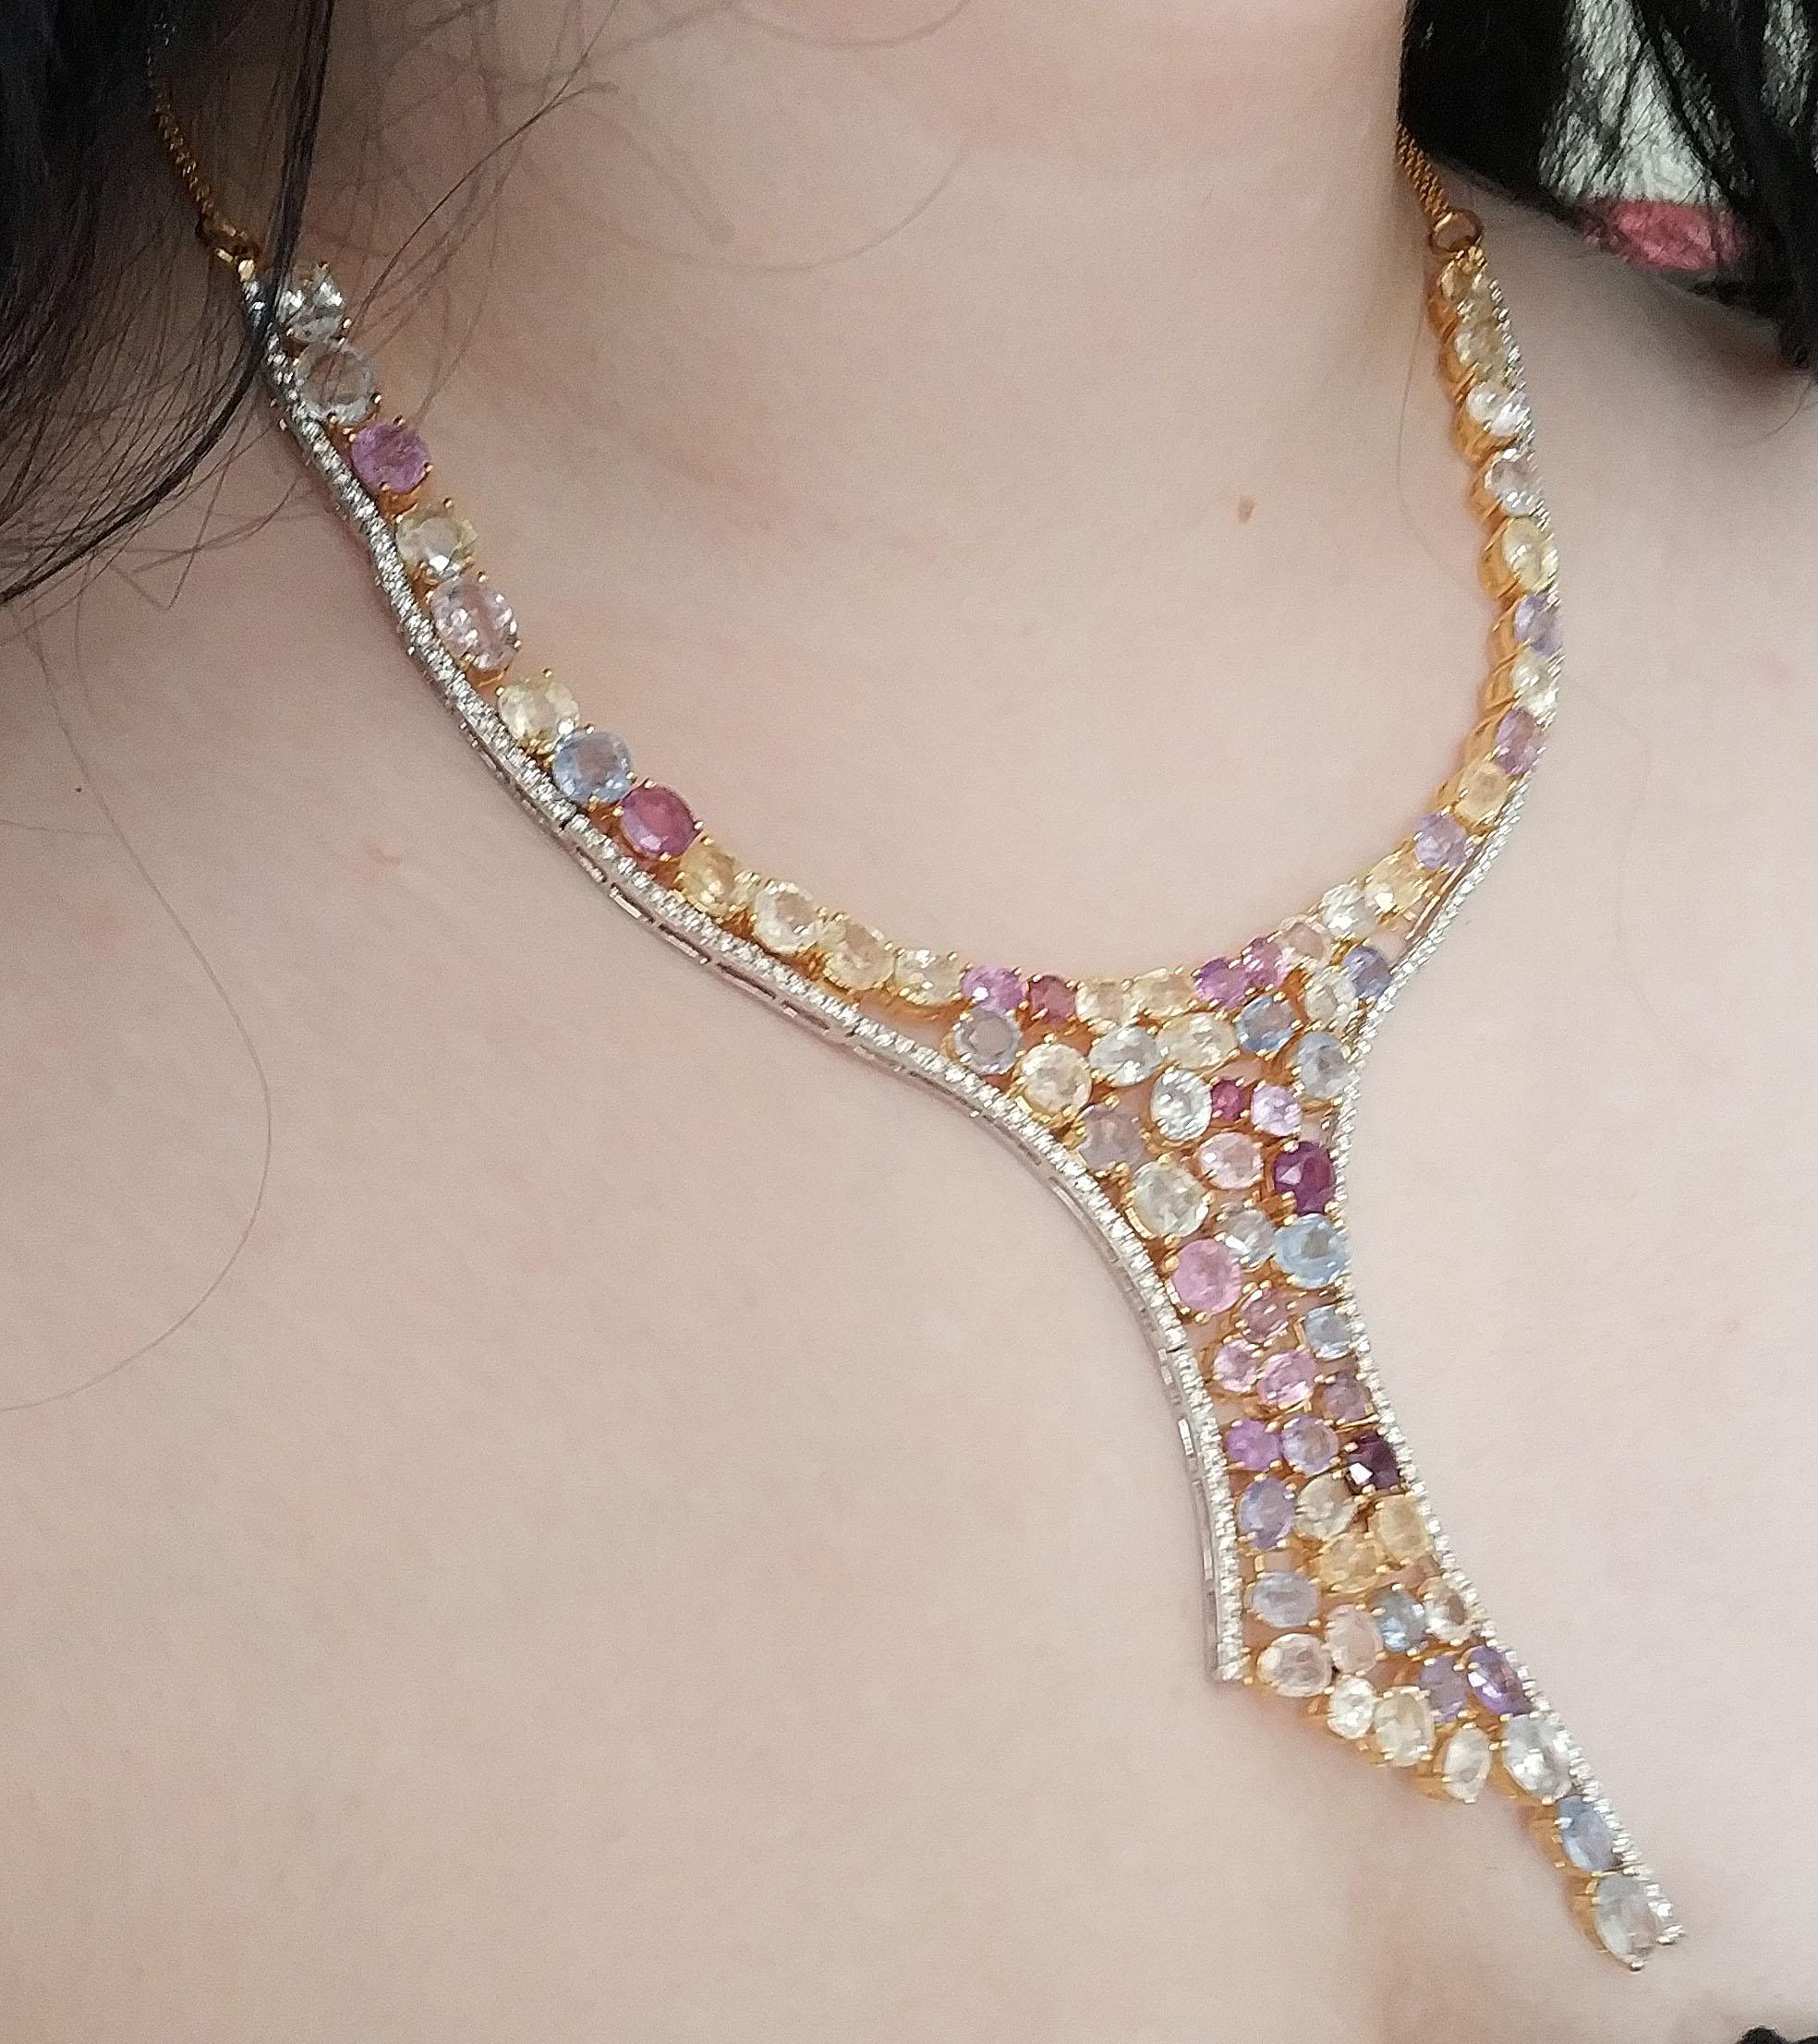 Anglo-Indian 113 Carat Multicolored Sapphire and Diamond Necklace in Hourglass Design For Sale